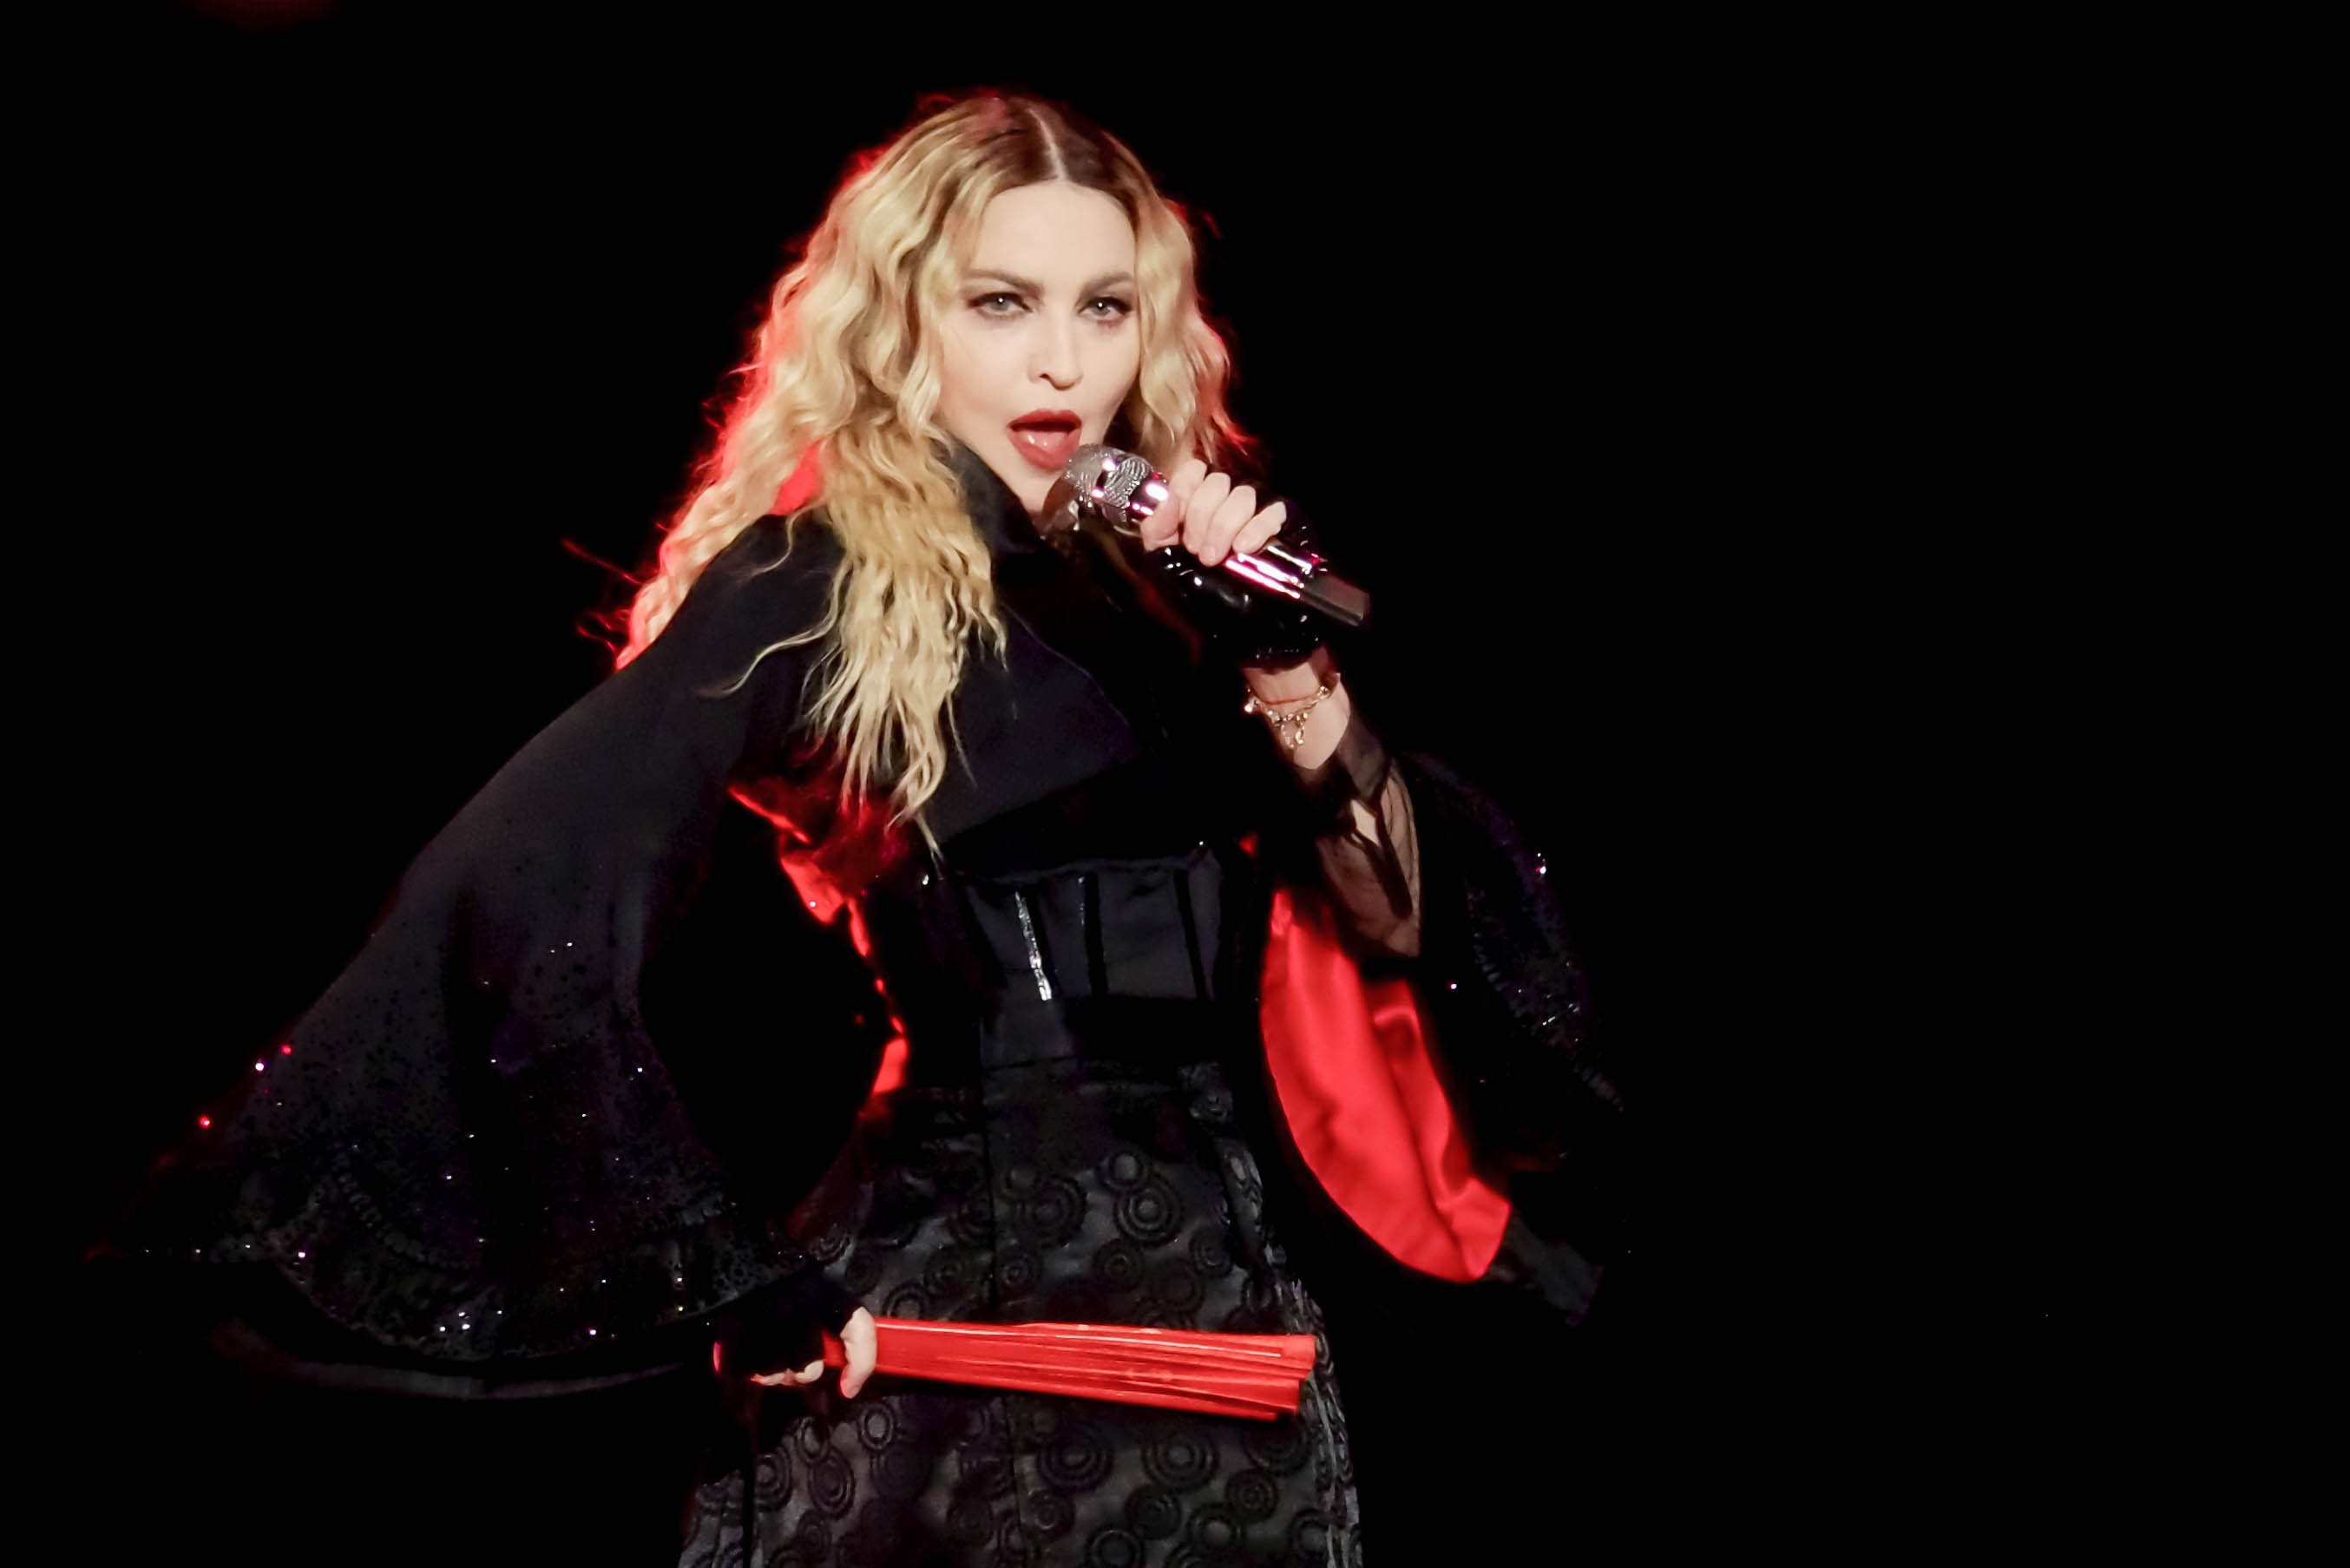 Madonna, who wants to work with Kendrick Lamar, waering black and singing